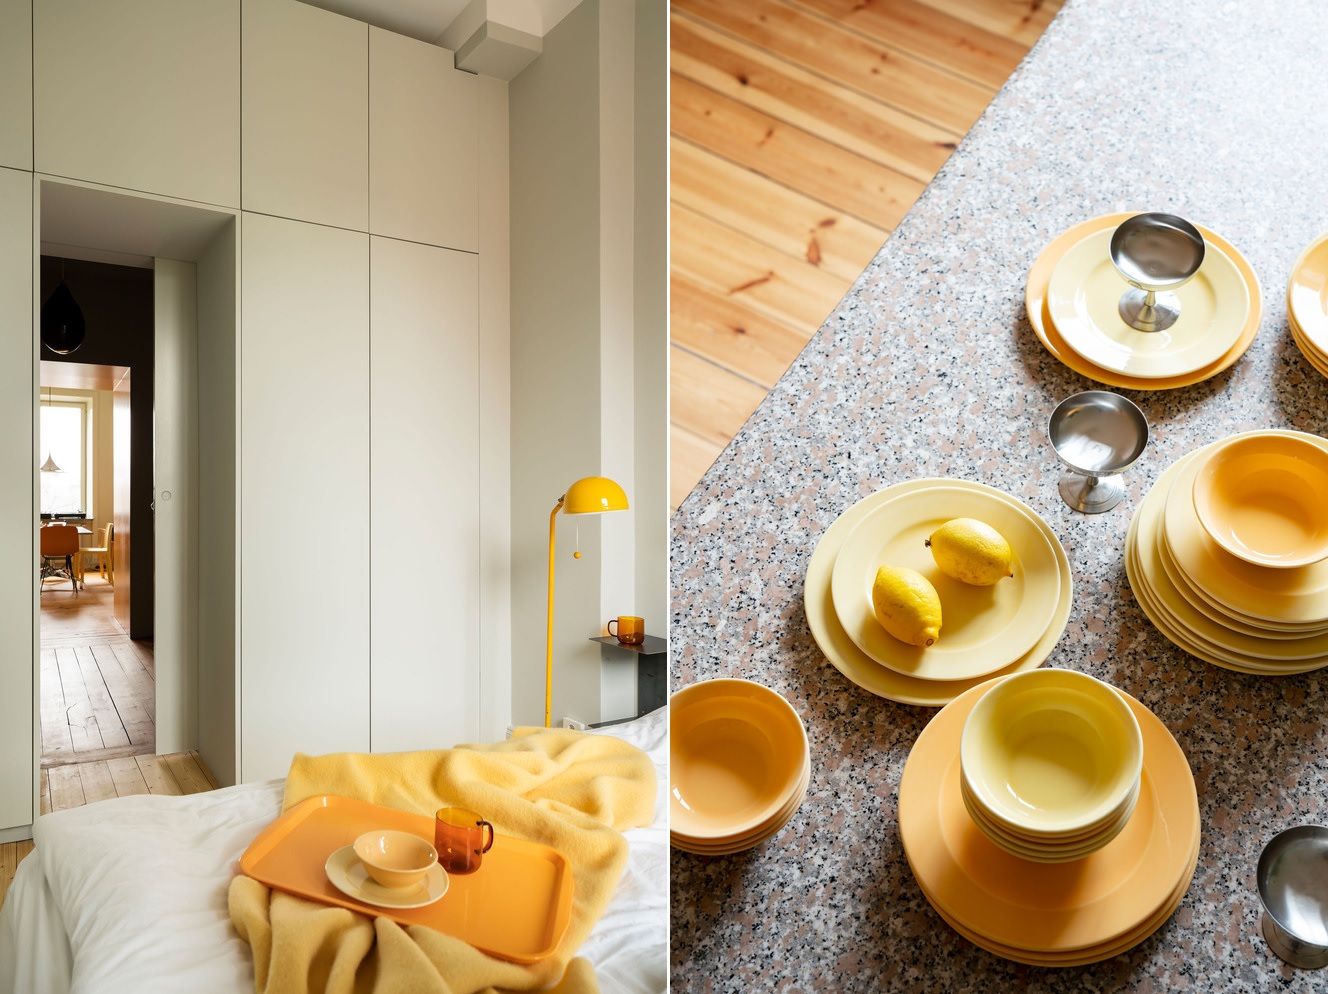 Yellows are integrated into the apartment decor everywhere, in each room